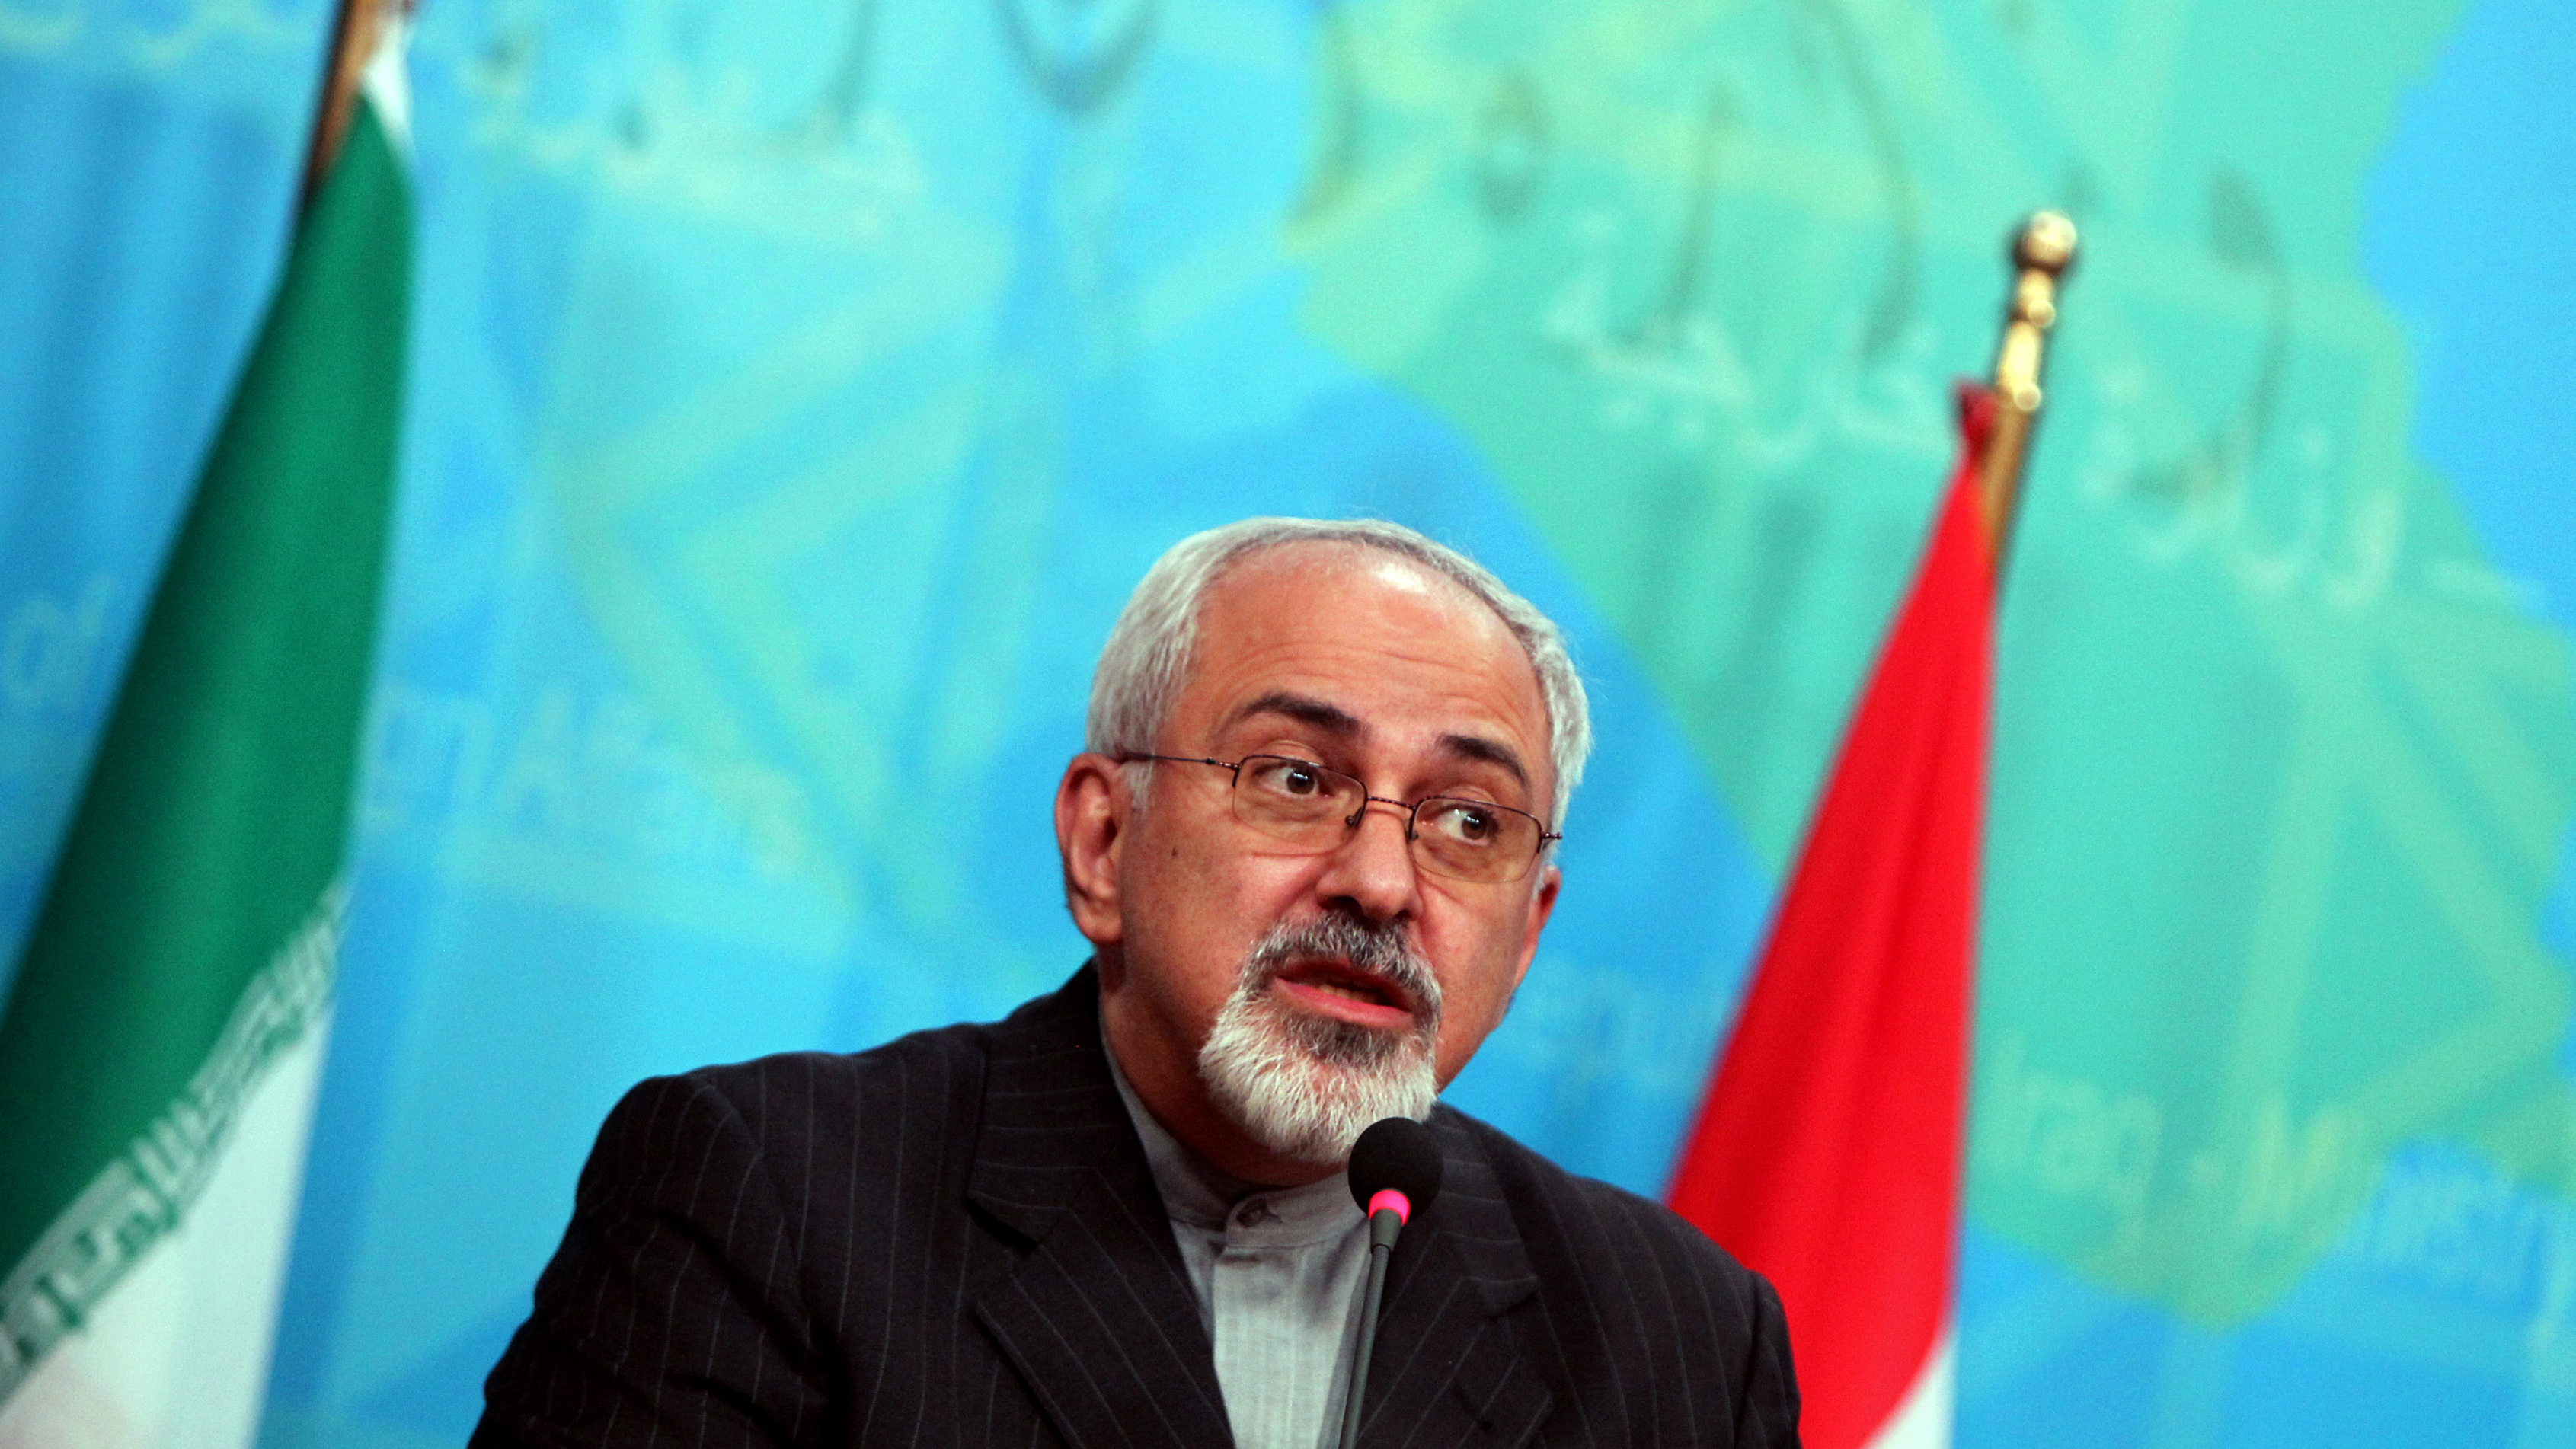 Talks on lifting non-nuclear sanctions likely: Zarif